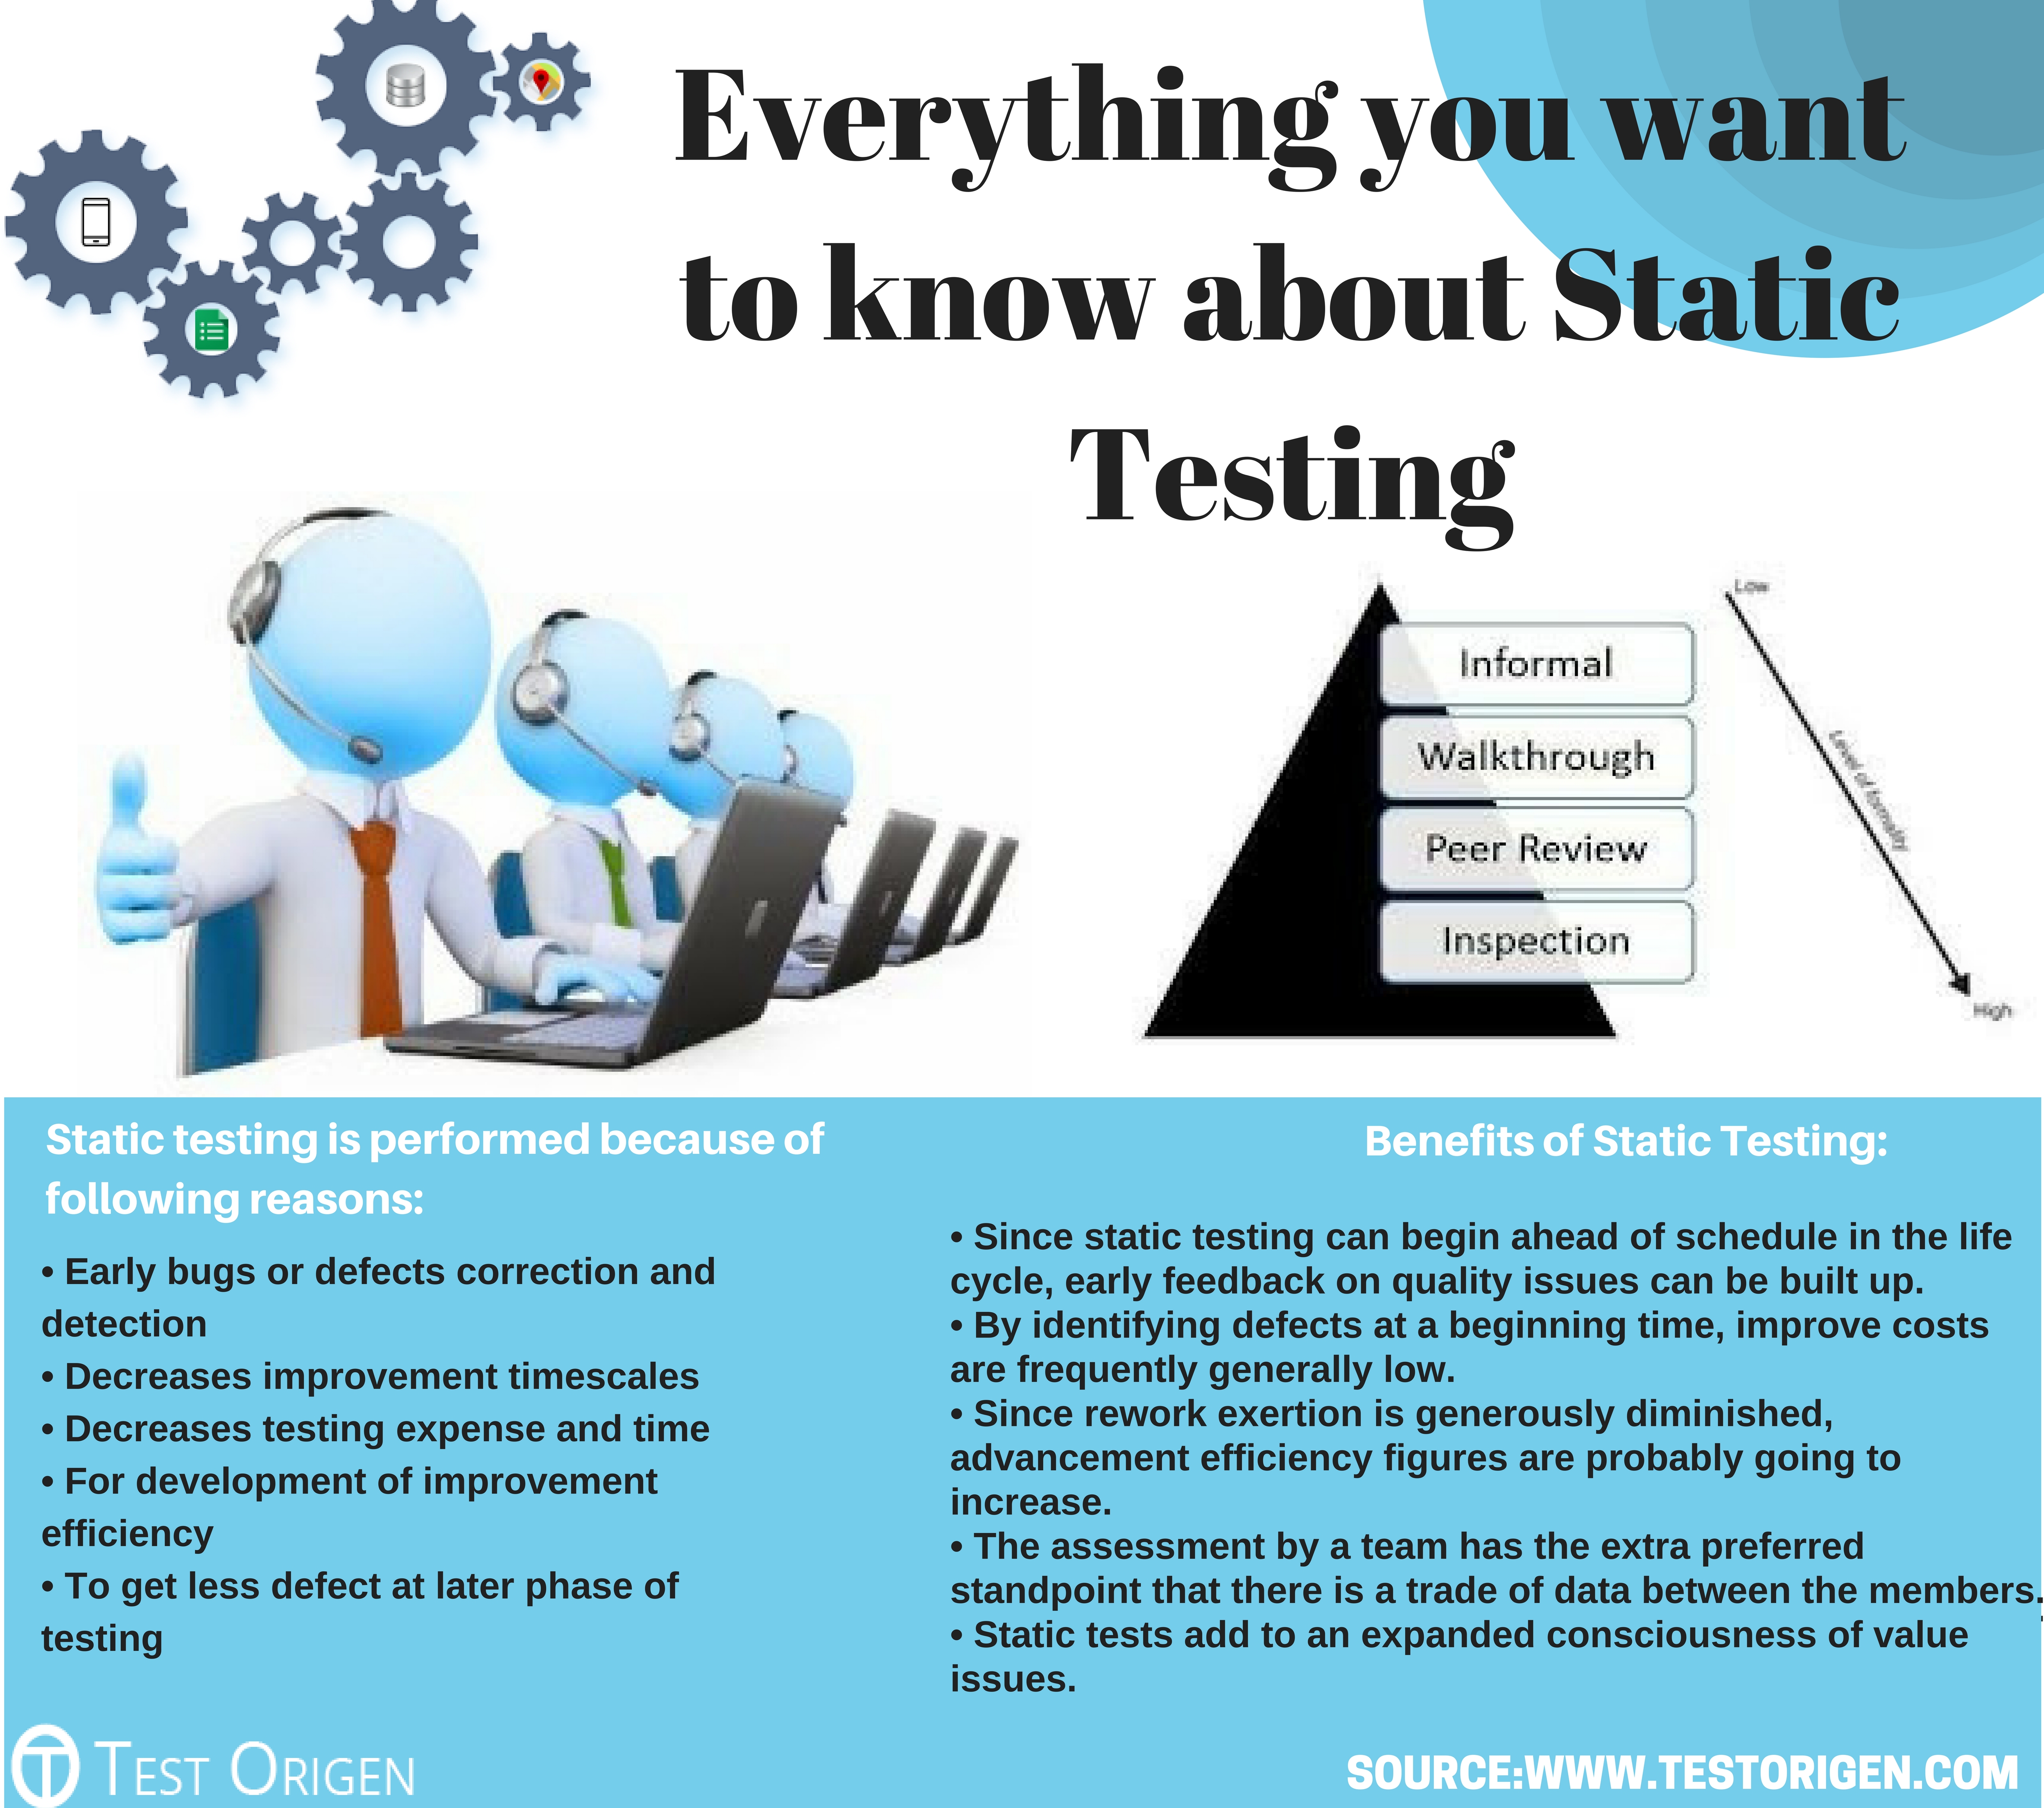 Everything you want to know about Static Testing